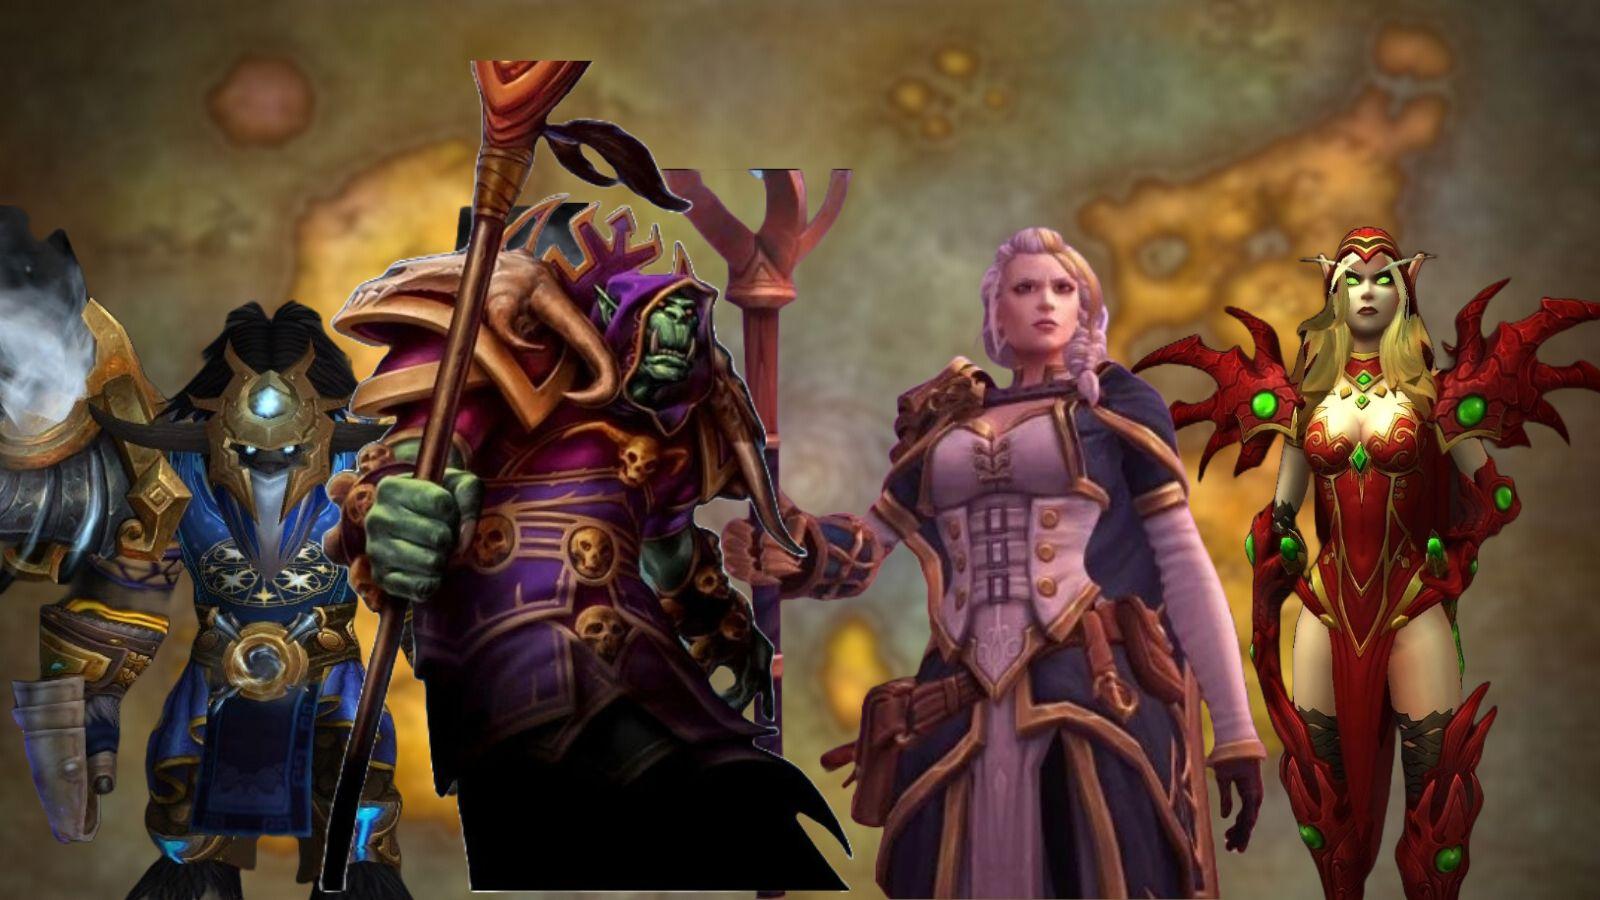 The four new roles for Season of Discovery on the Azeroth world map background